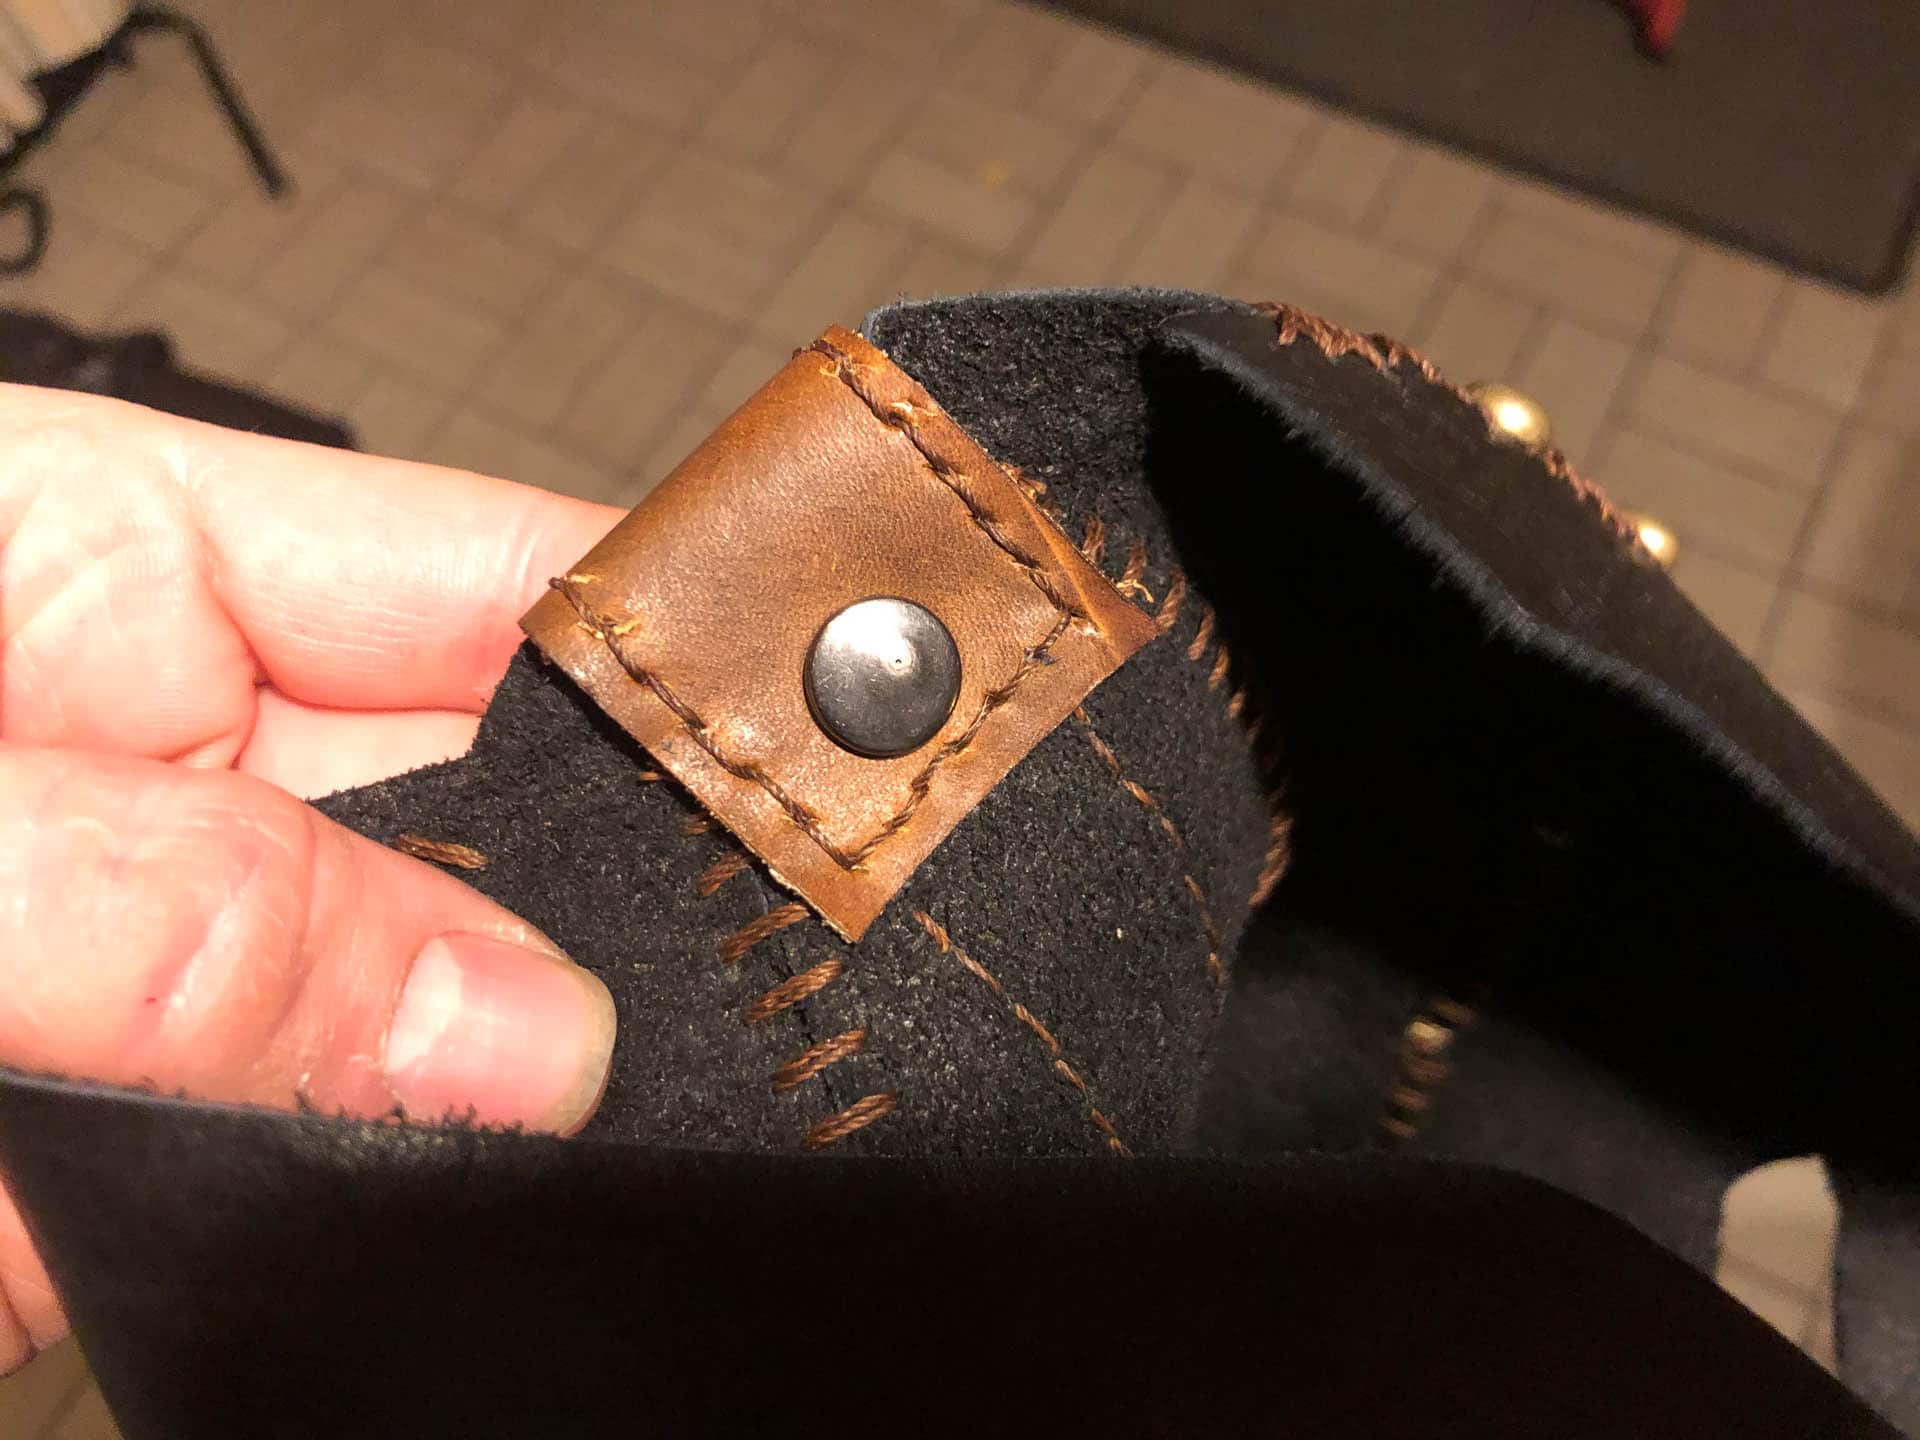 Snap to hold leather top brace in place